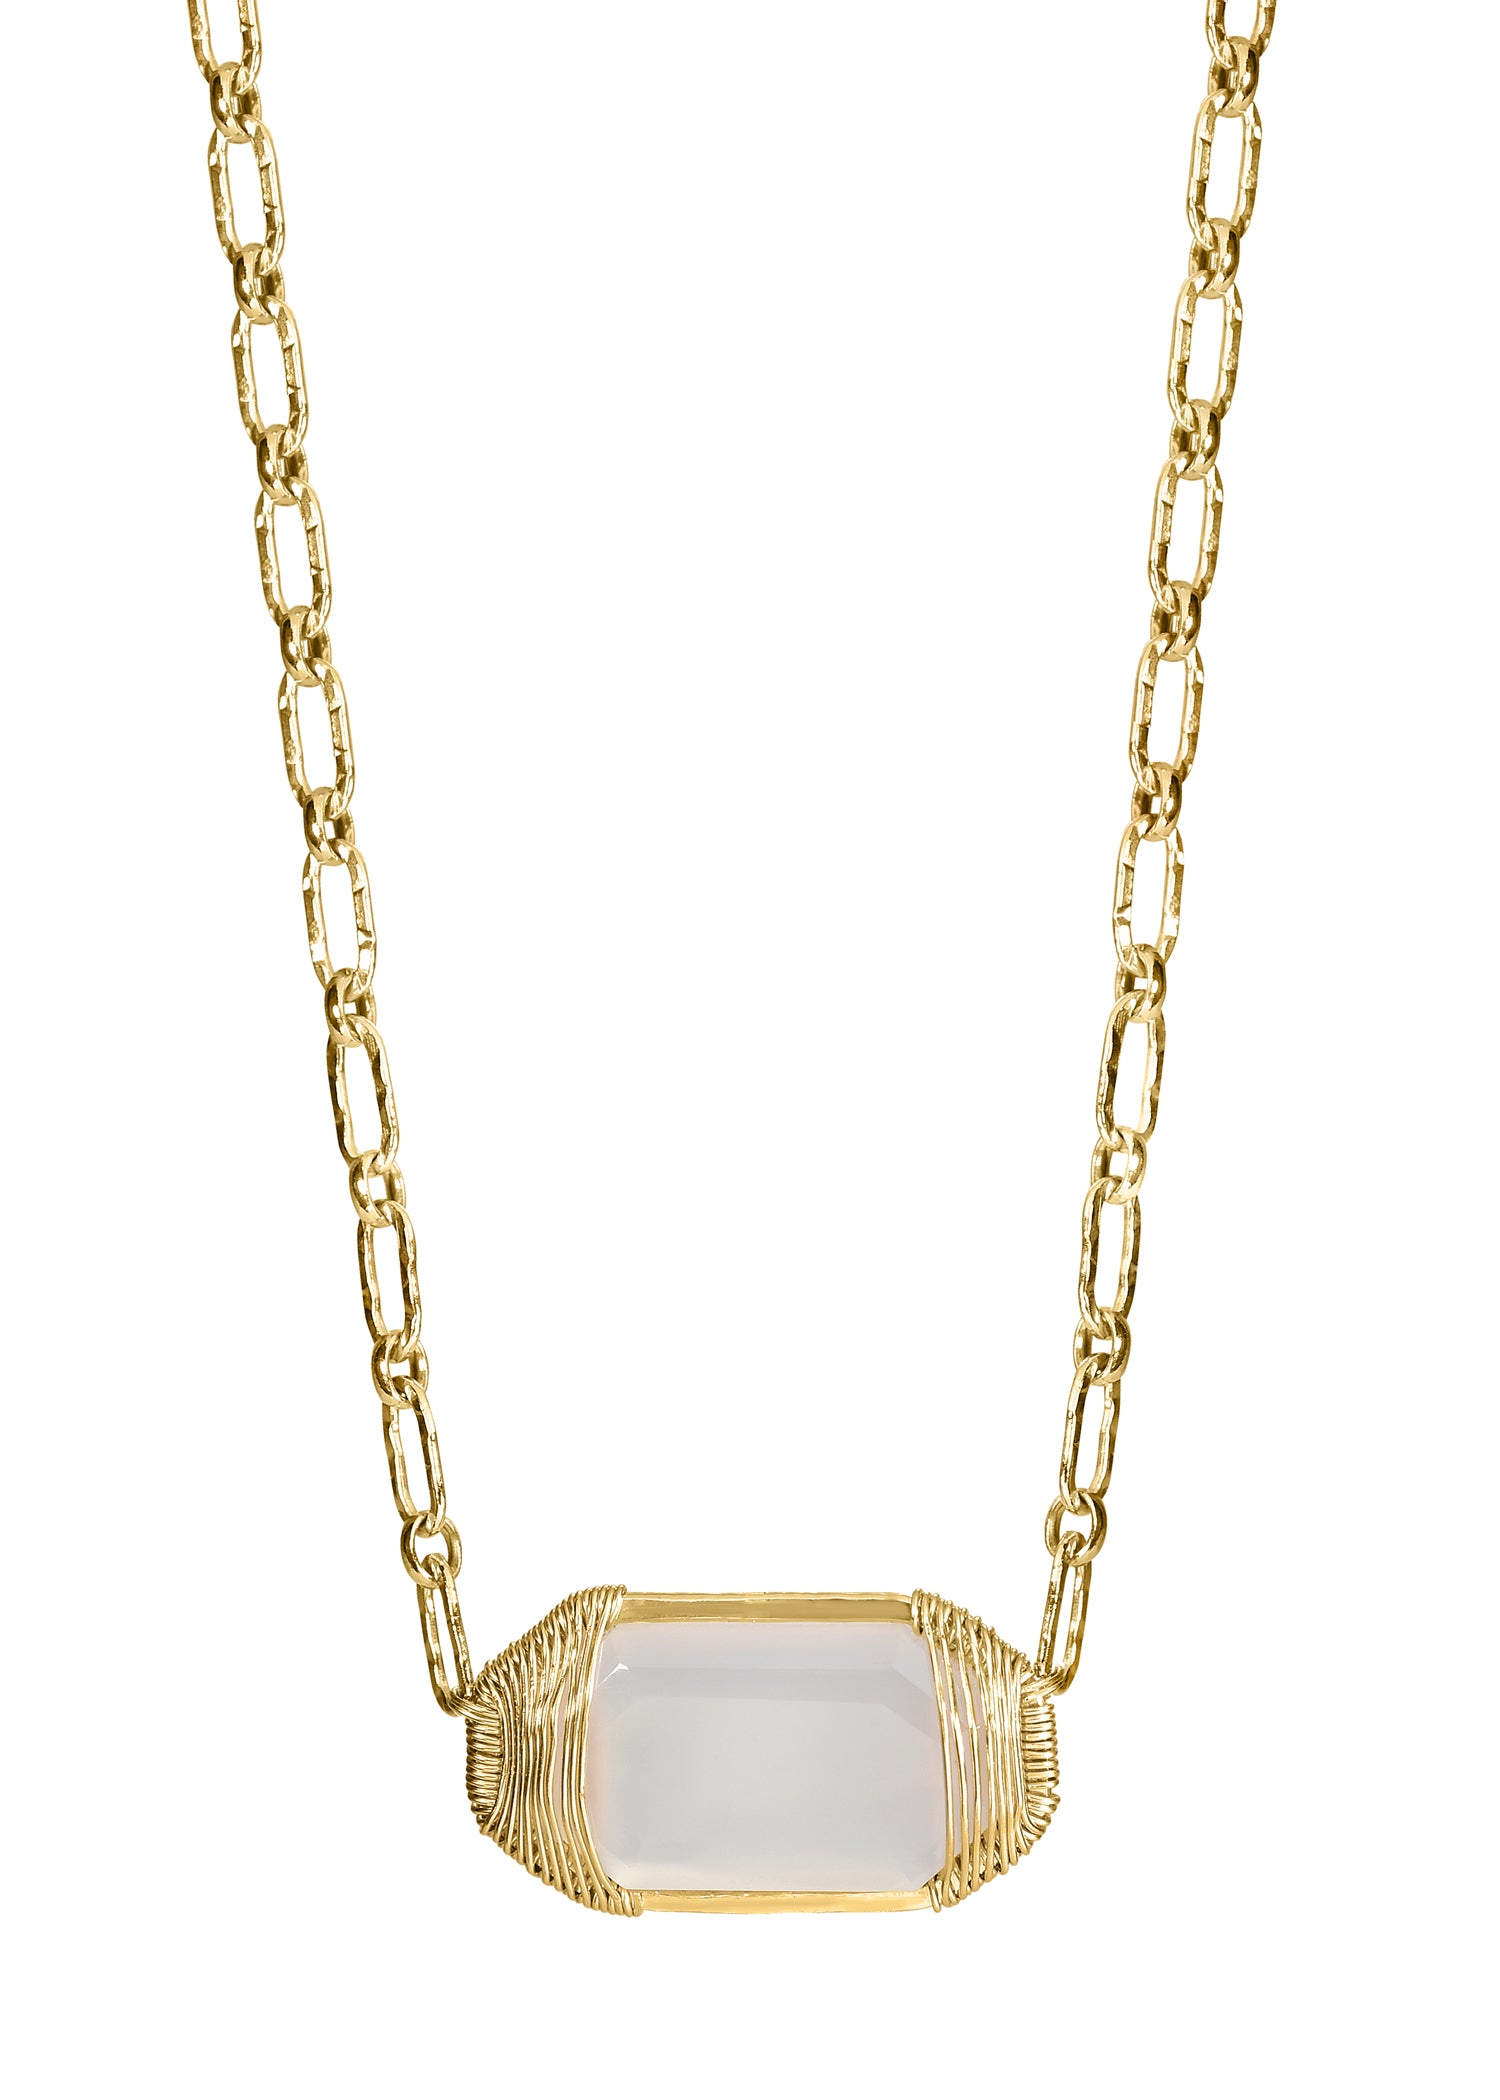 Natural chalcedony 14k gold fill Necklace measures 15-1/2" Pendant measures 1/2" in length and 13/16" in width Handmade in our Los Angeles studio